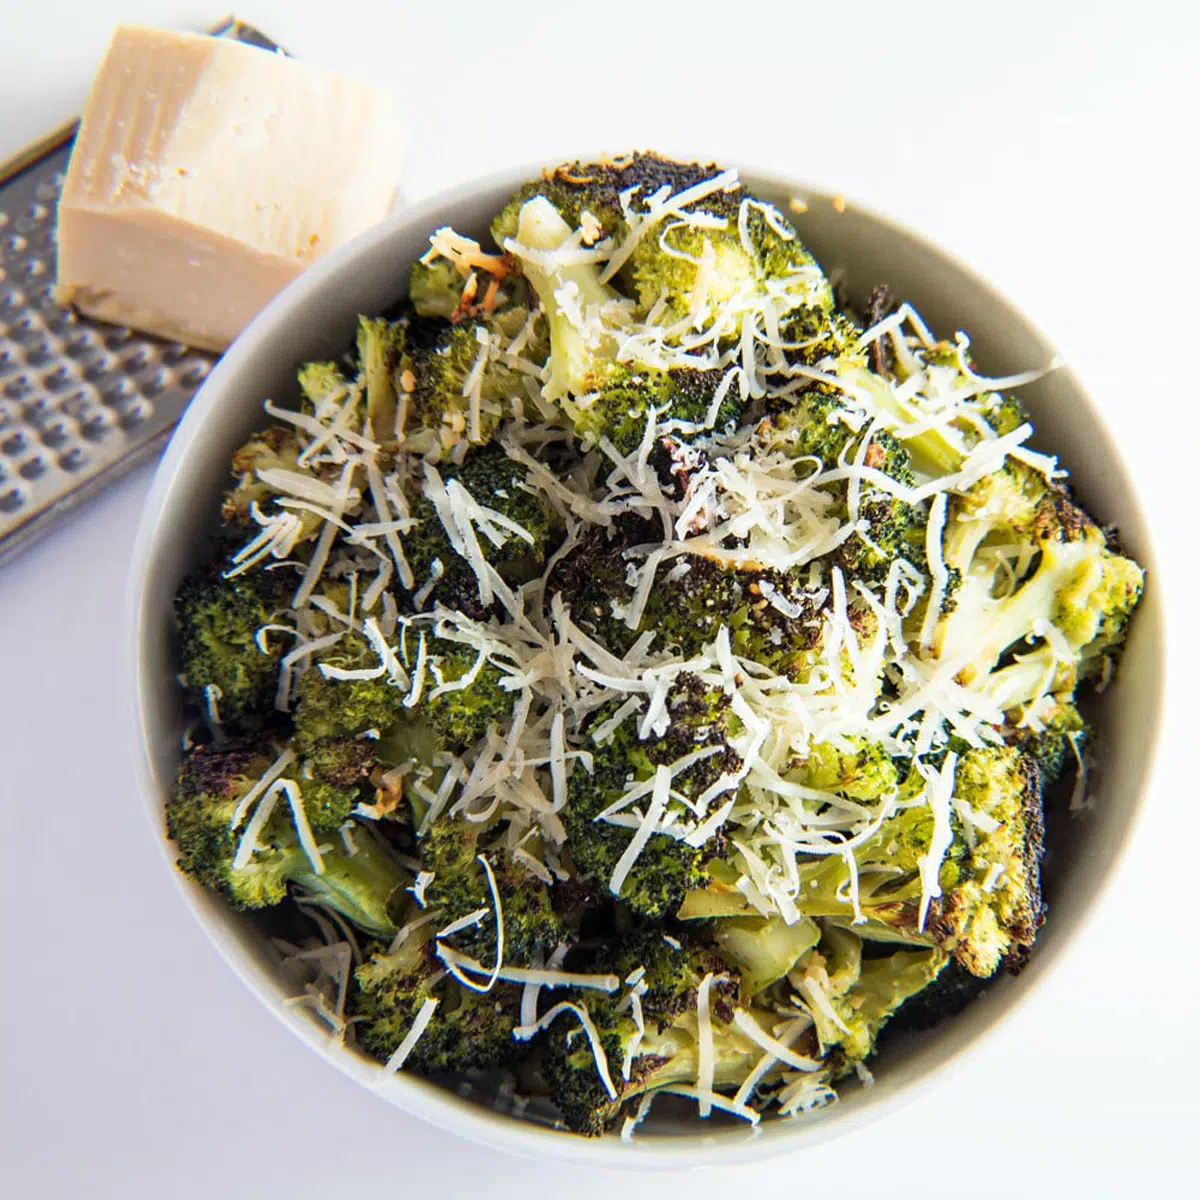 Roasted broccoli in a white bowl with Parmesan on top.